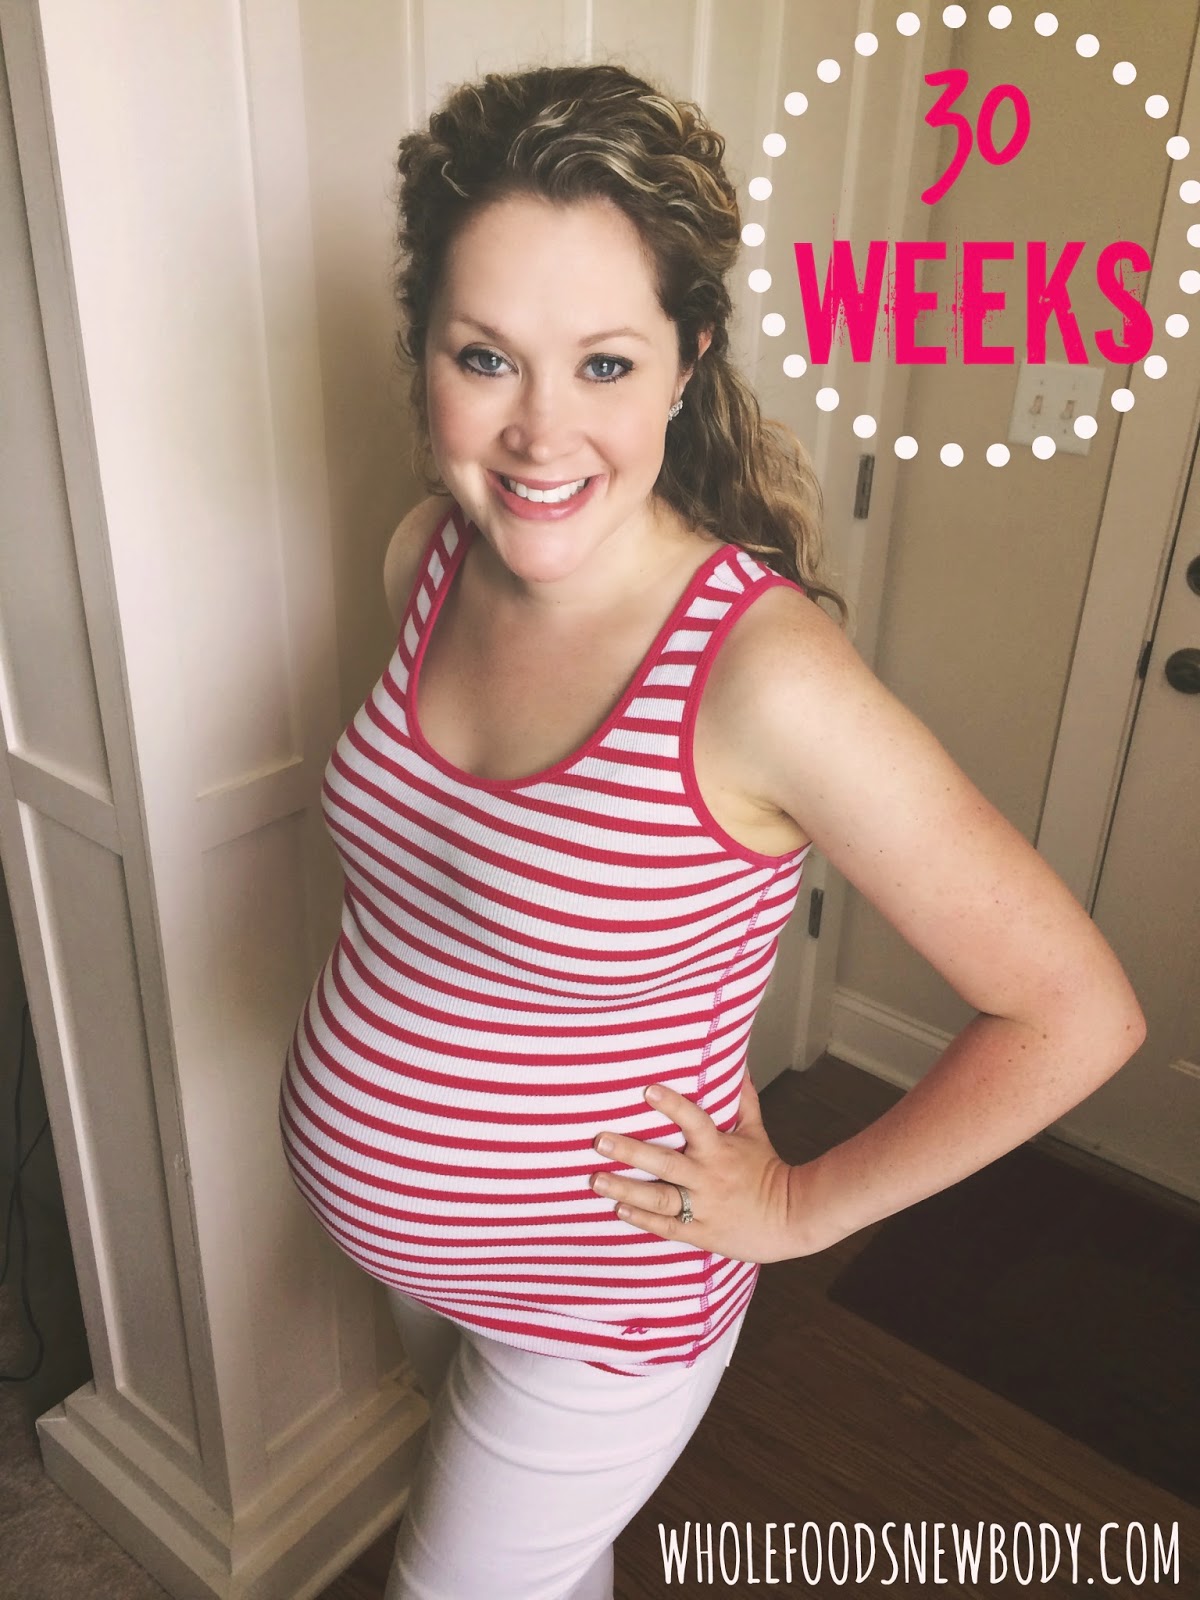 Whole Foods New Body: {30 week BUMPdate}